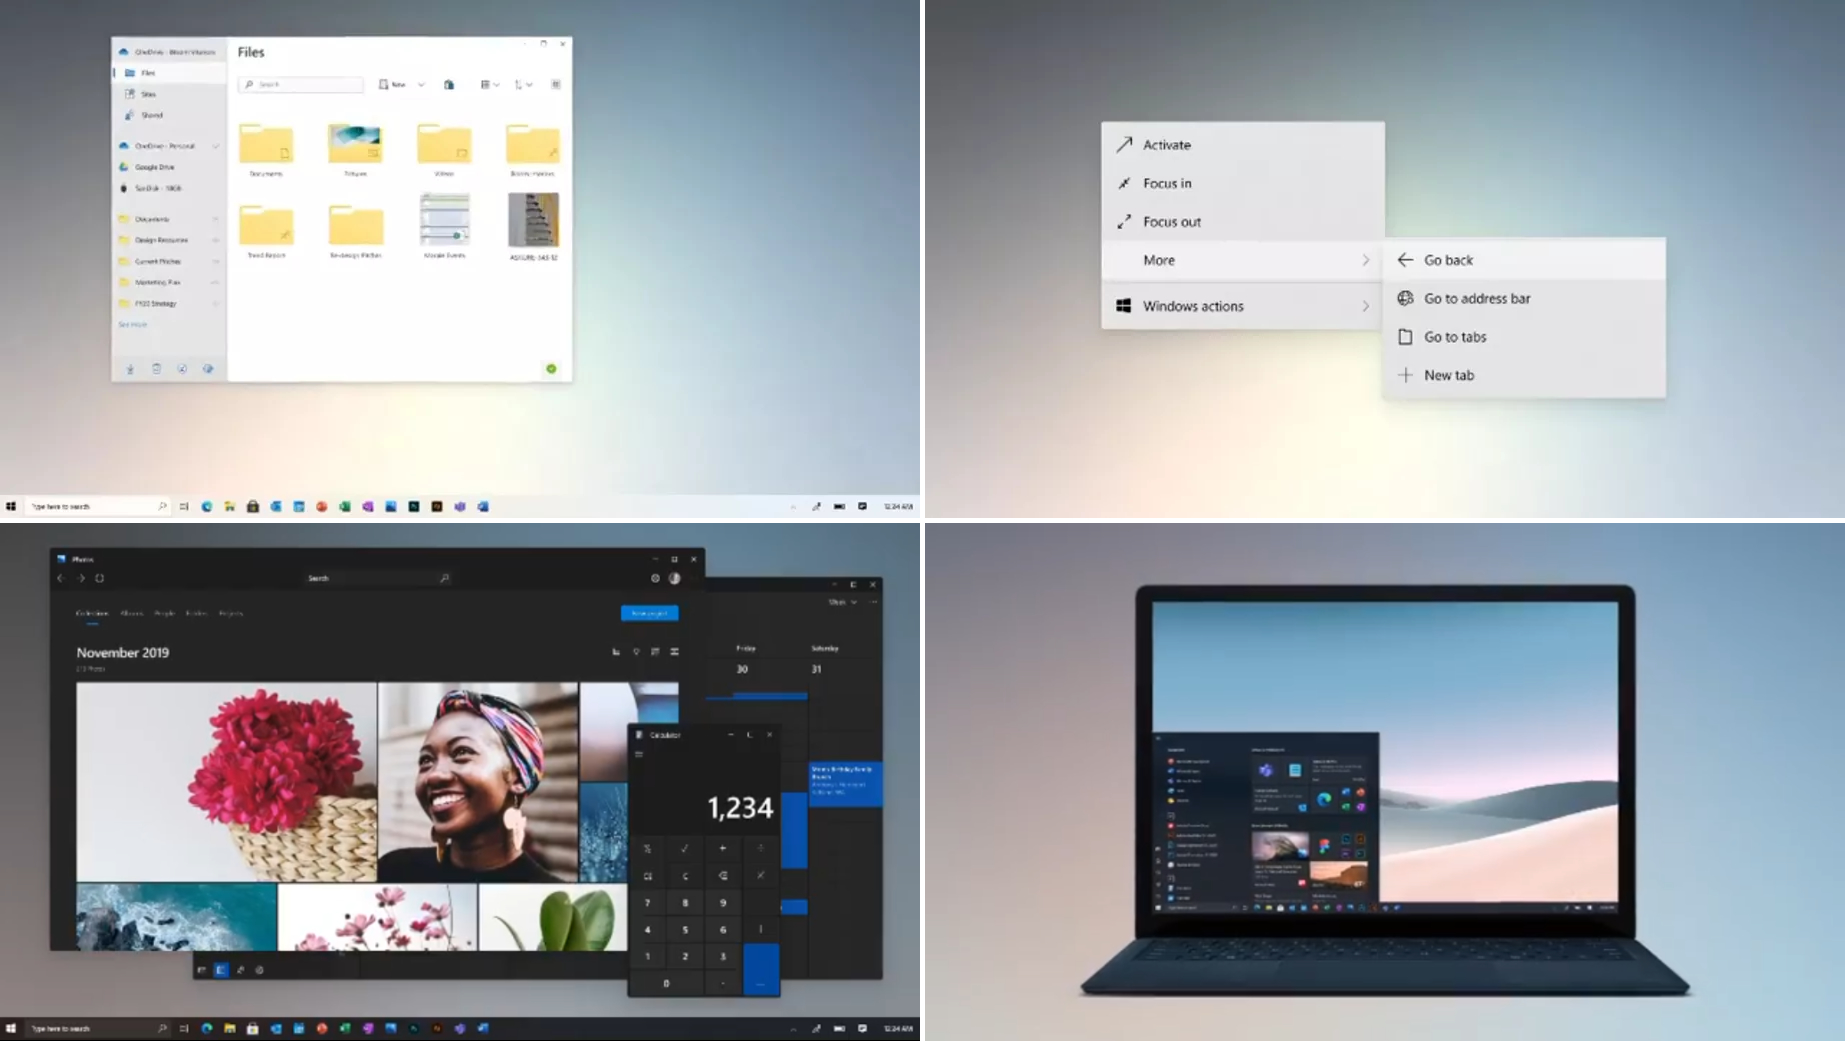 Microsoft's job post teases its new vision for Windows 10